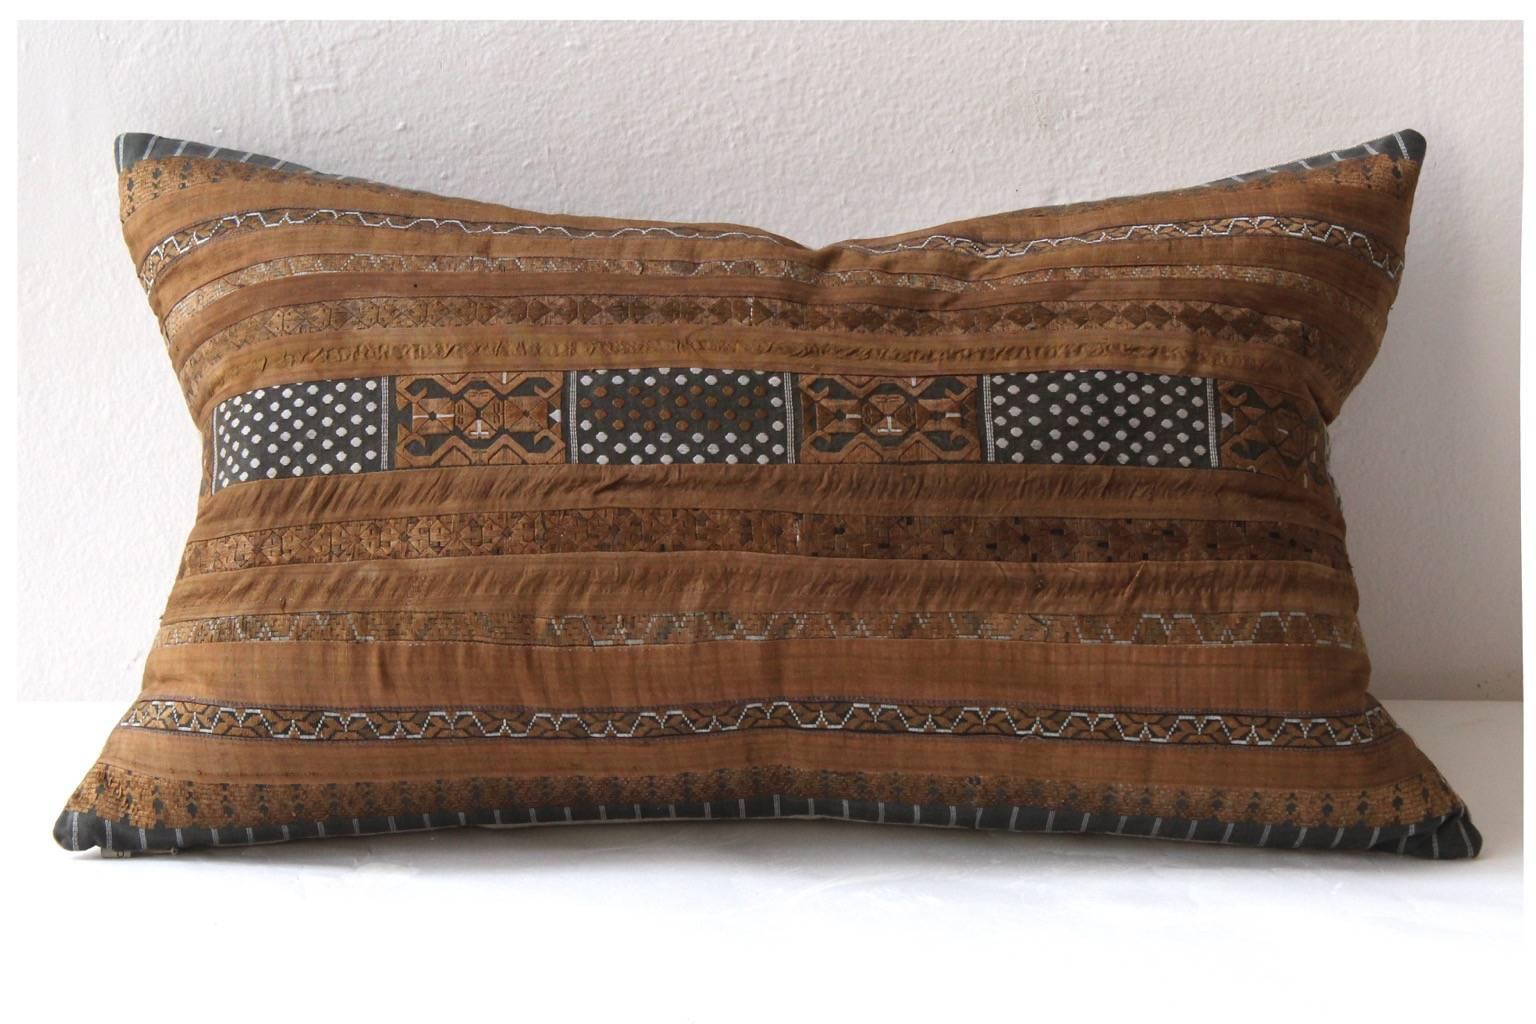 Bronze Huang Ping textile cushion. Vintage silk on cotton embroidered ribbons. Motifs of butterflies. 

Oatmeal linen on reverse.
75/25 goose feather and down inserts.
Concealed zippers.
Check our 1stdibs storefront for pillows in coordinating